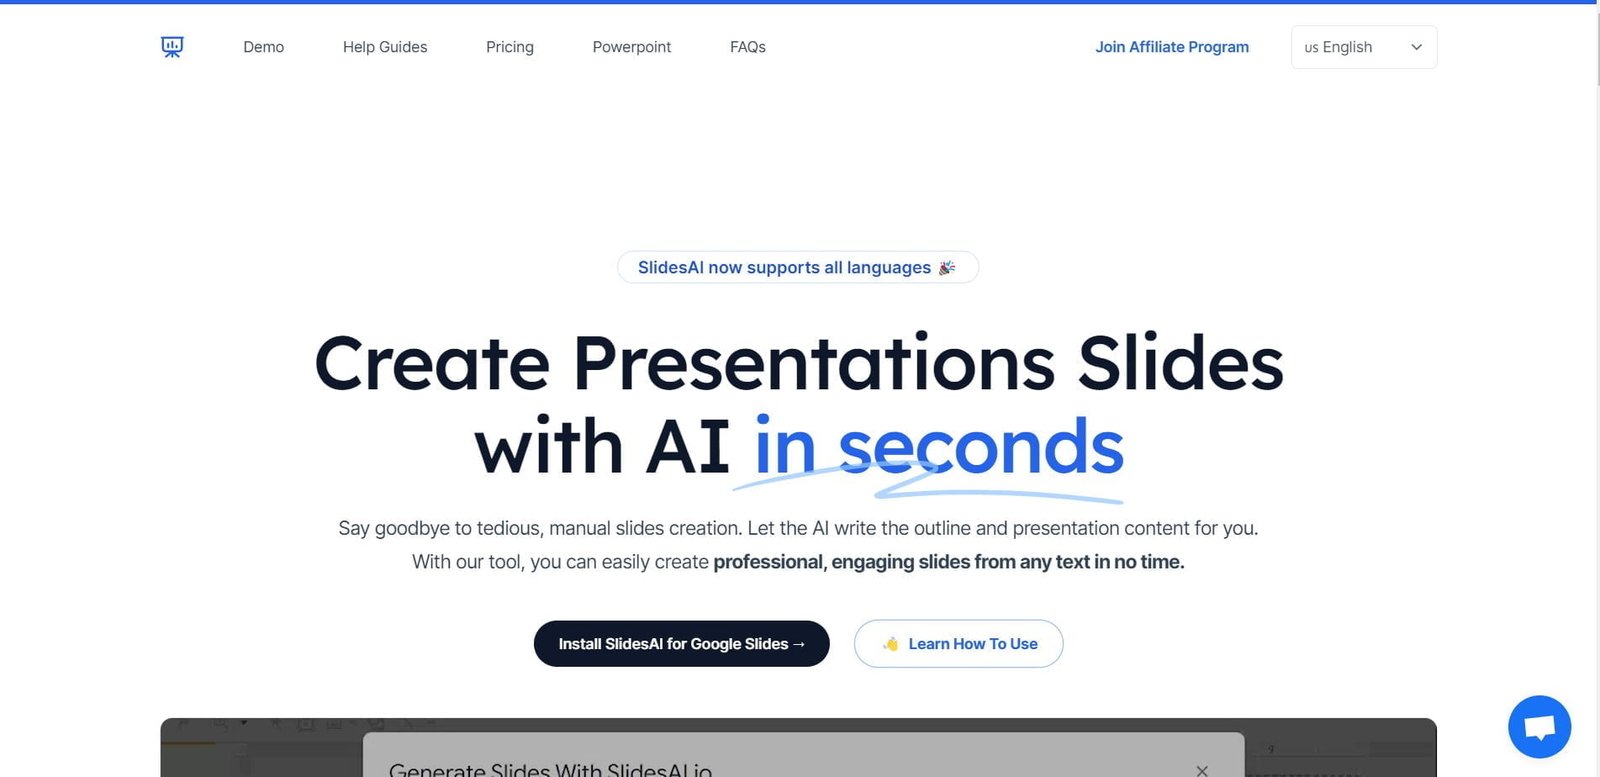 SlidesAI is an AI PowerPoint presentation tool designed to work seamlessly with Google Slides. It automates the process of creating presentations